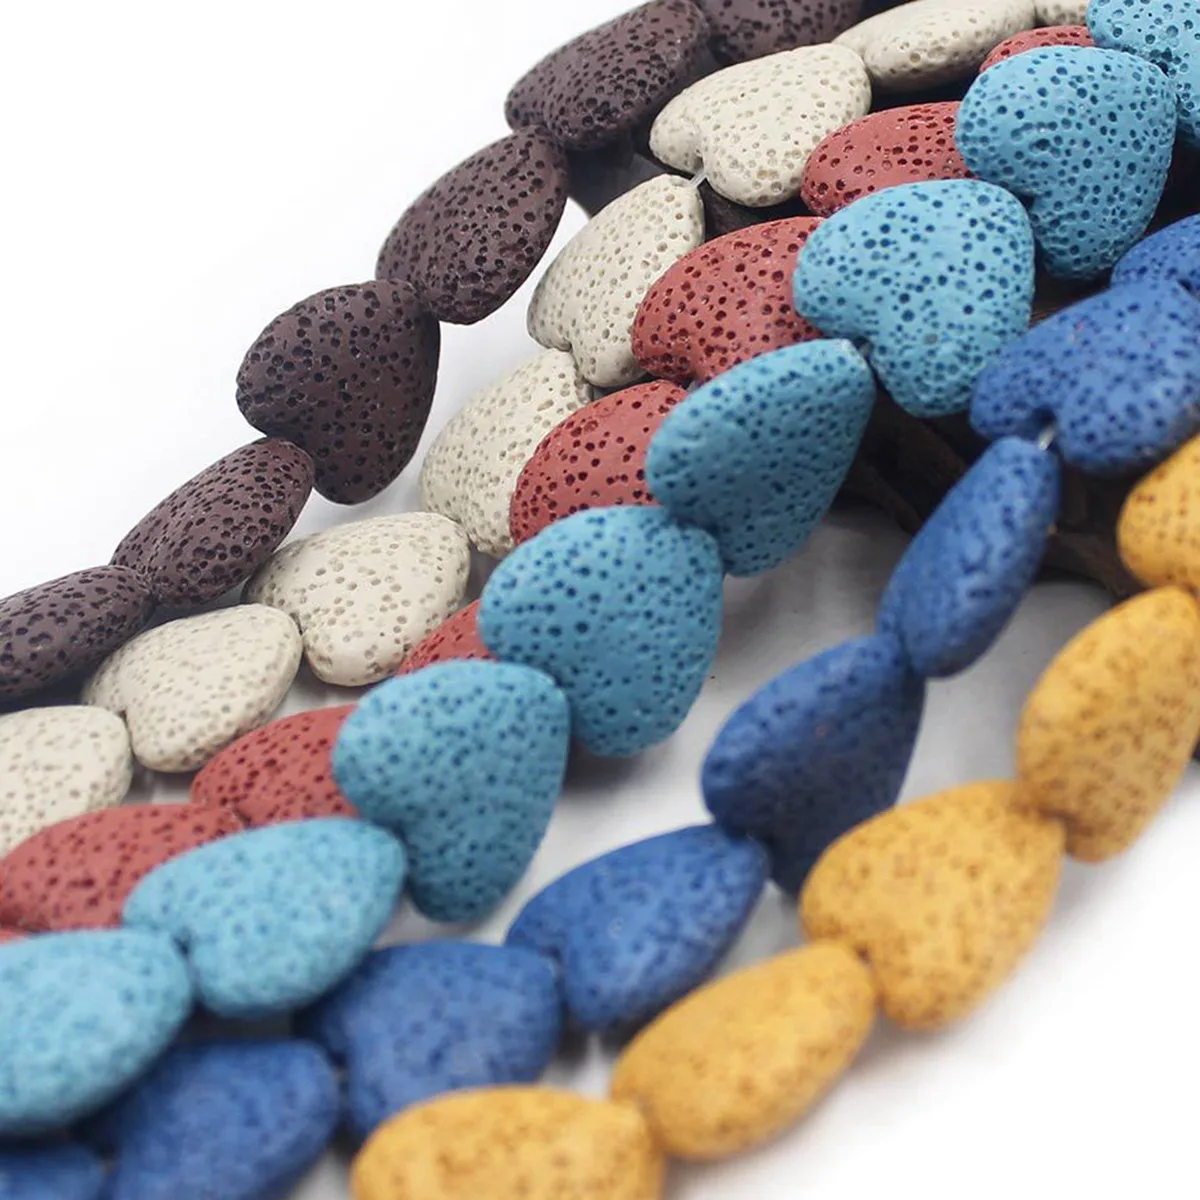 

20MM Love Heart Colorful Lava Stone Beads Loose Rock Volcanic Gemstone Hearts for Earrings Bracelet Necklace Jewelry Making